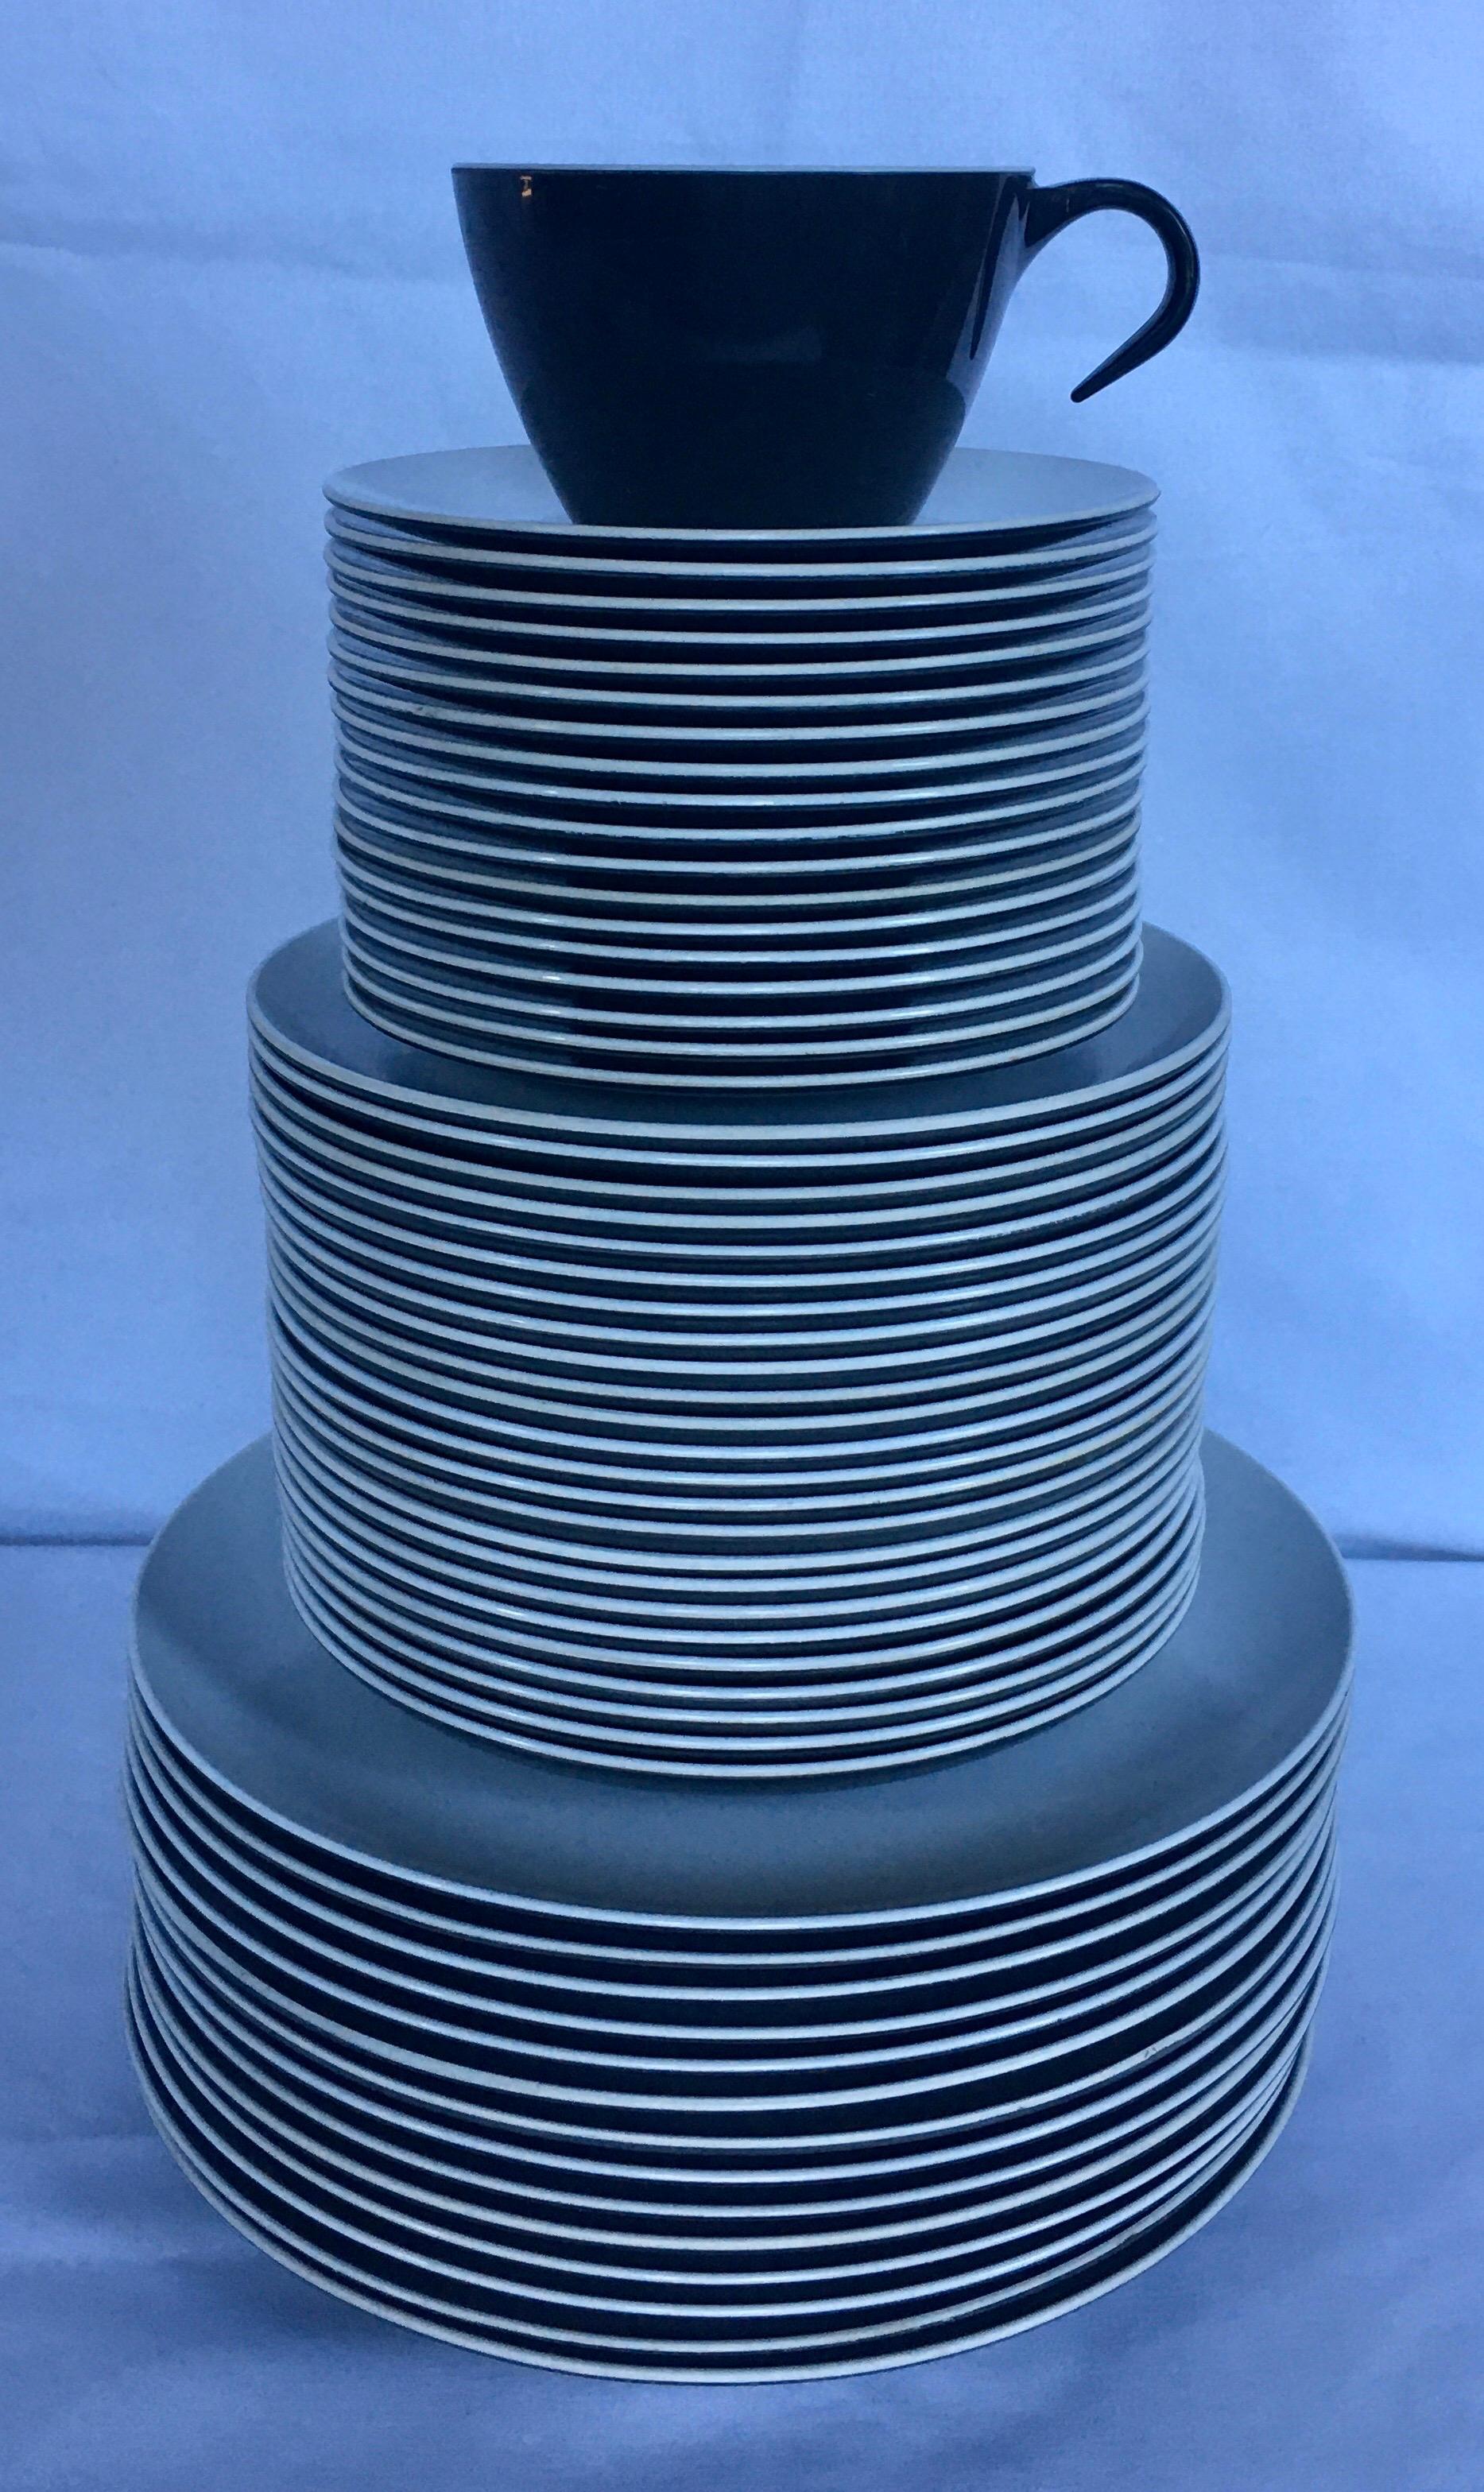 Mid-Century Modern pan Am American Airlines black/charcoal and white 74 piece melamine dinnerware service. Set includes 14 large plates, 24 small plates, 18 cups, and 18 saucers. Dated 1967.

14 large plates: 8.25in diameter.
24 small plates: 6.25in